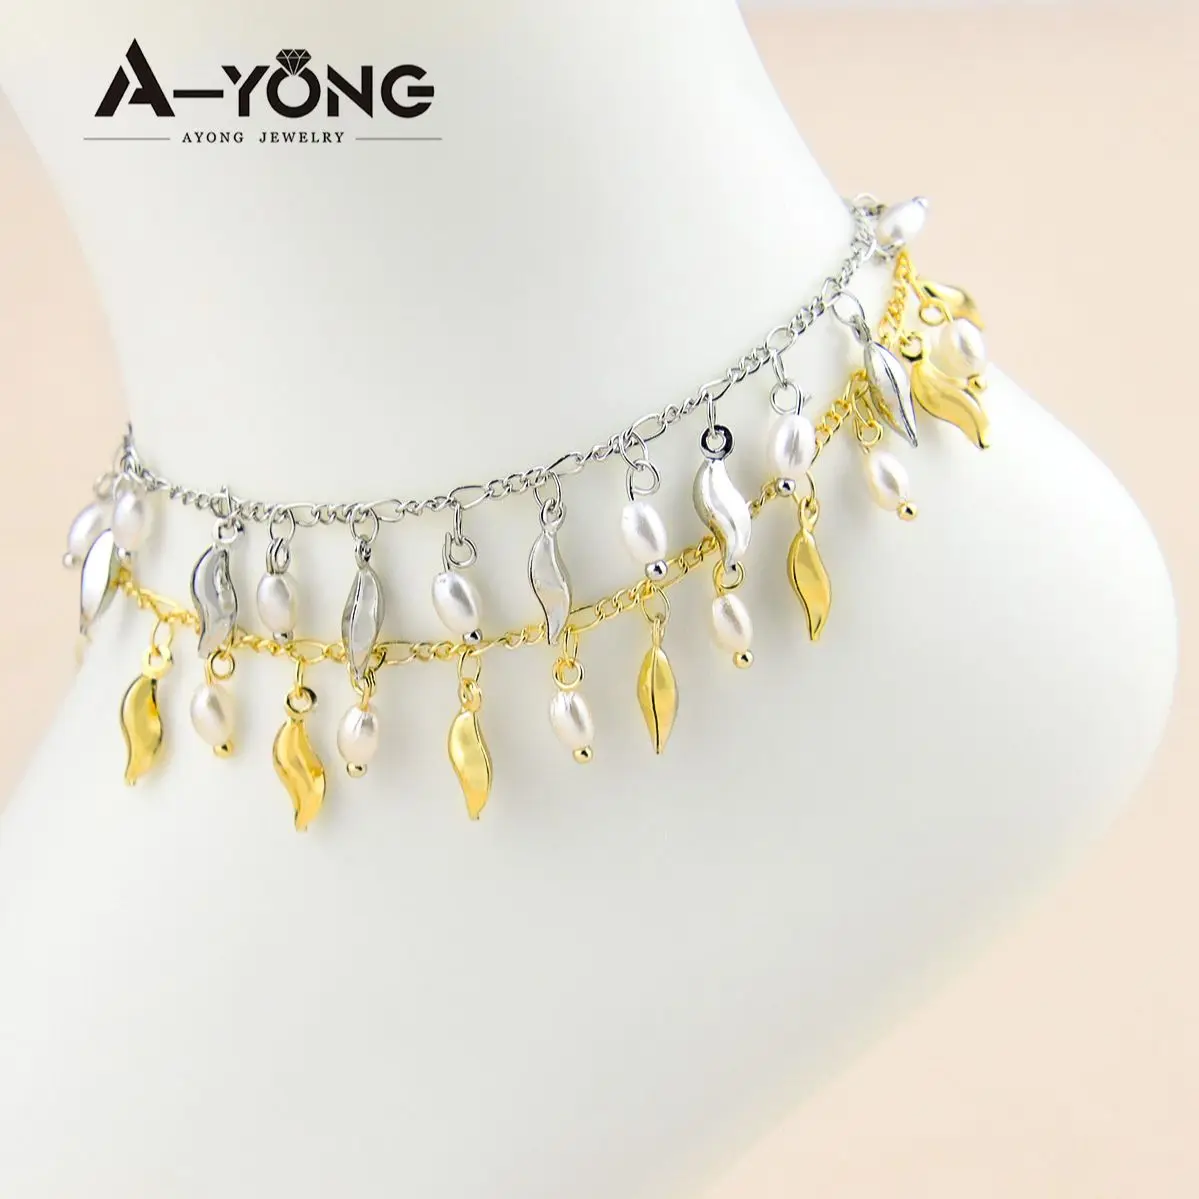 

AYONG Women Pearls Anklet Bracelet 18k Gold Plated Foots Link Chain Girls Ankle Bracelet Foot Jewelry Accessories